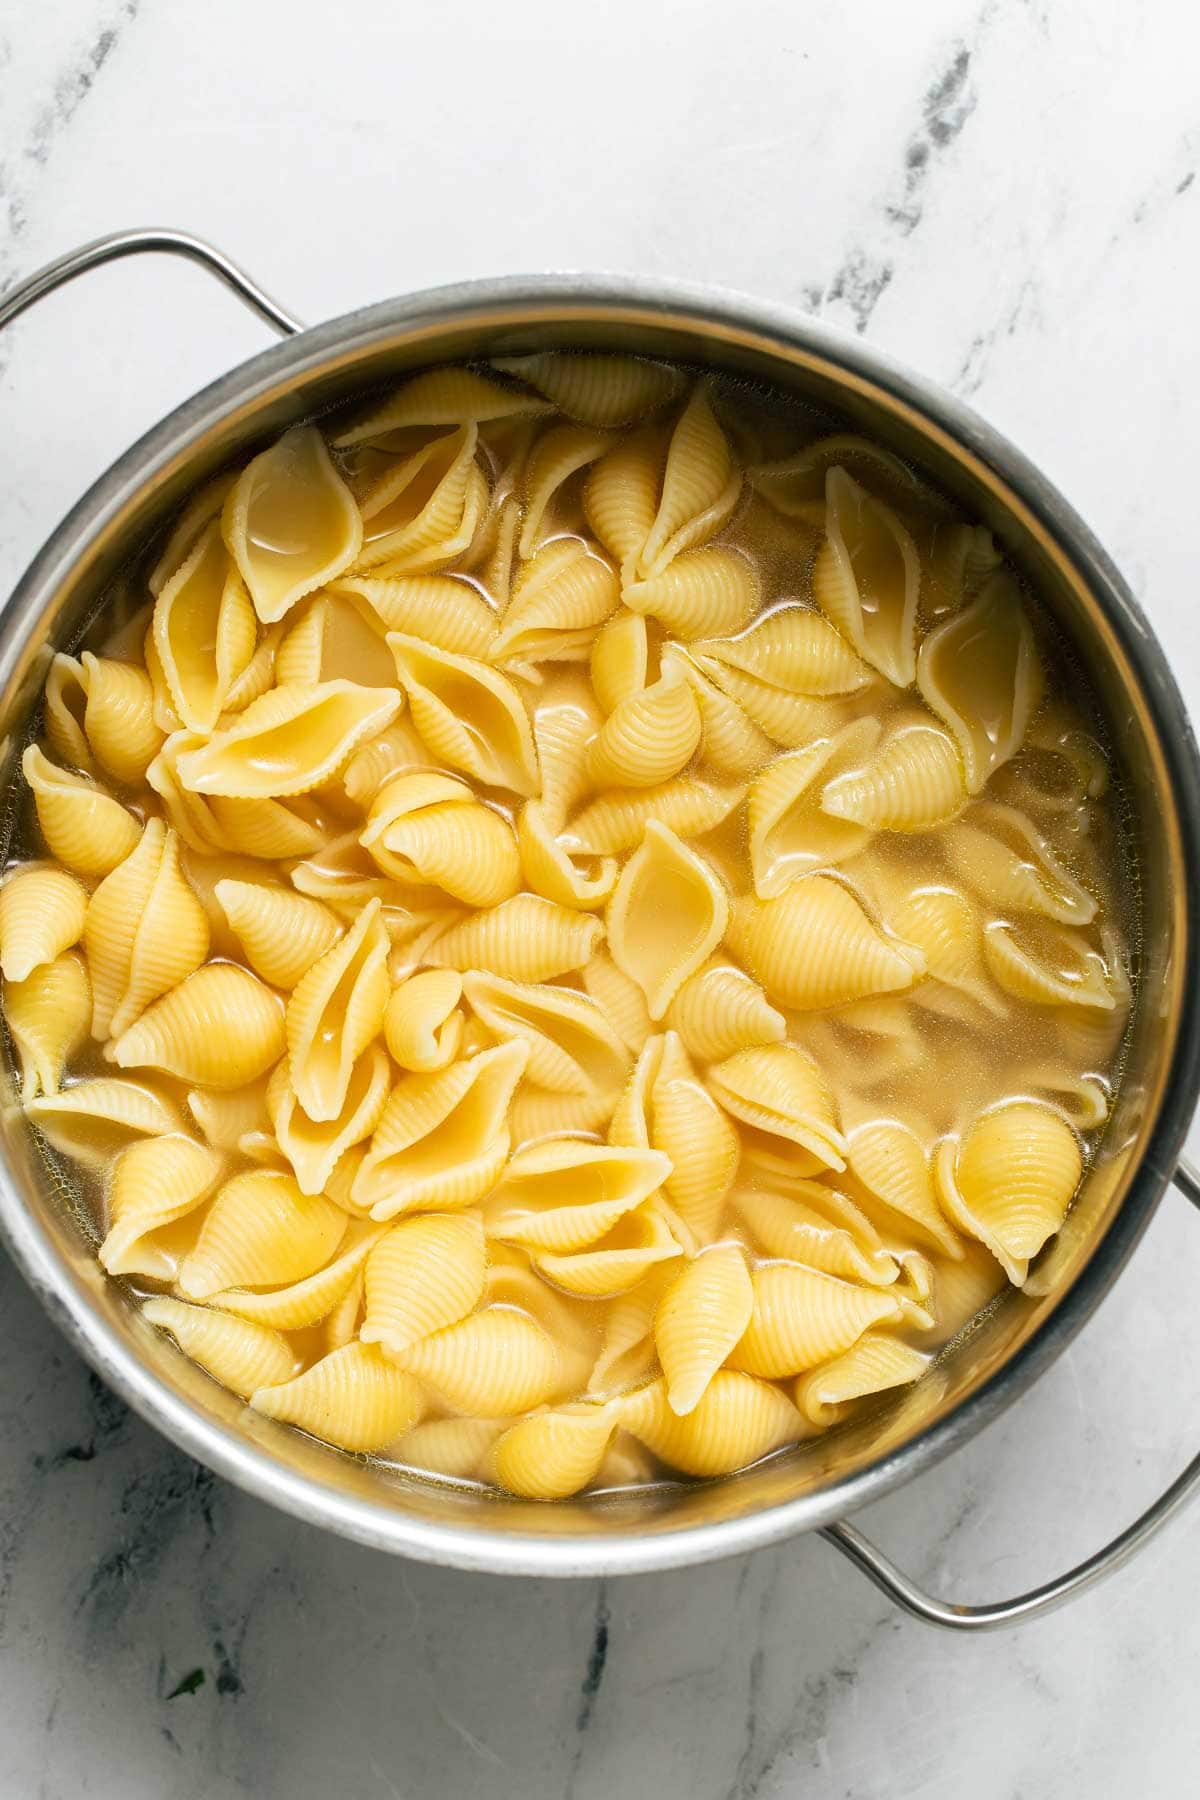 Boiling pasta in a pot.